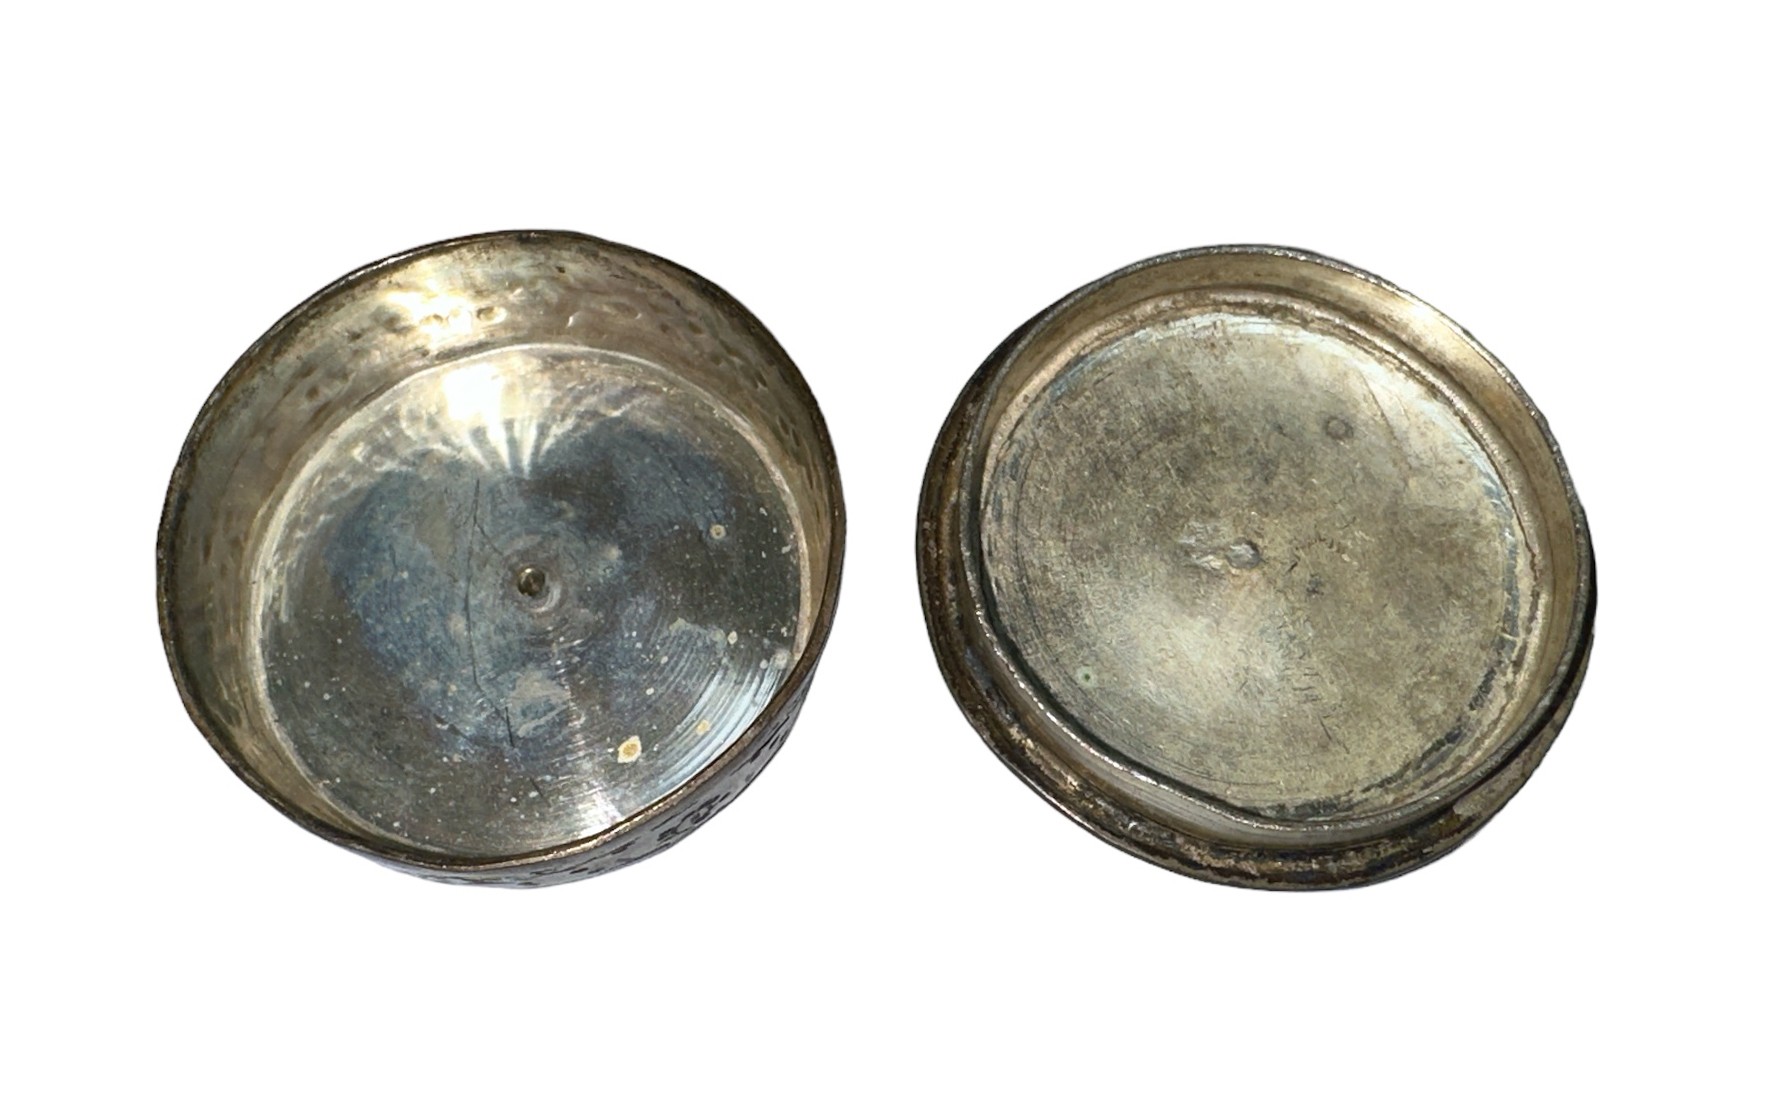 19th Century Persian round pill box, the lid inset with a mother-of-pearl panel decorated with - Image 4 of 4